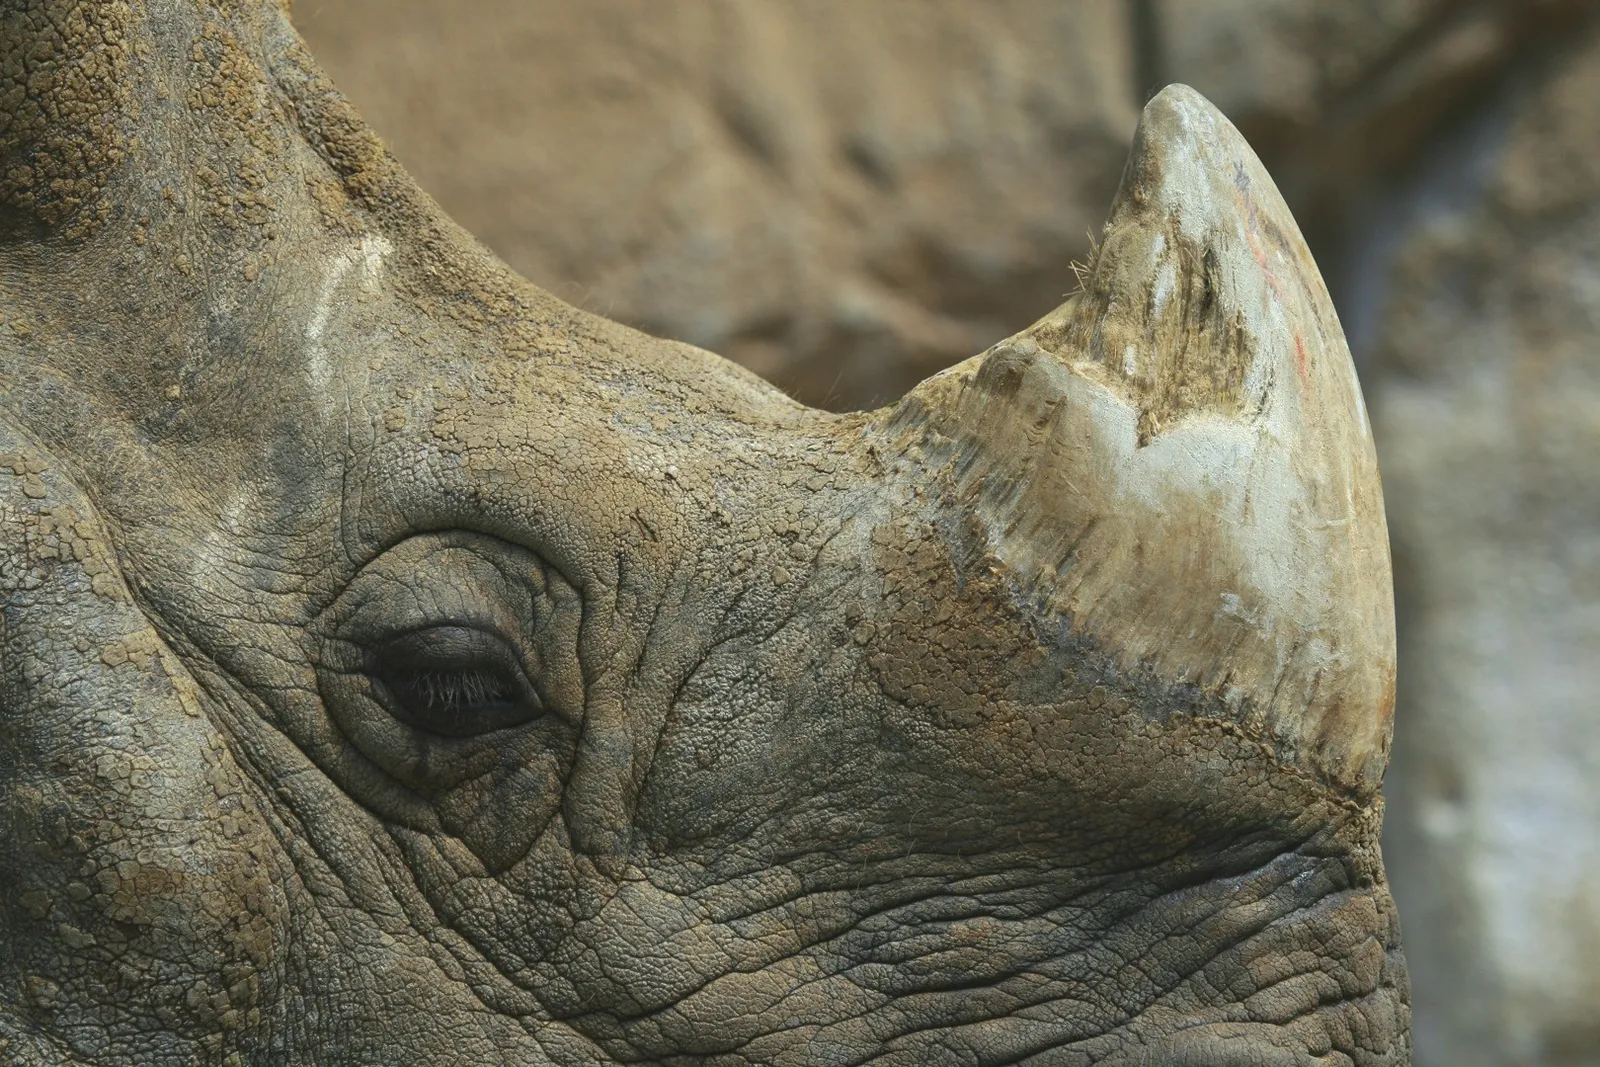 Could legalising the trade in rhino horn save the species?